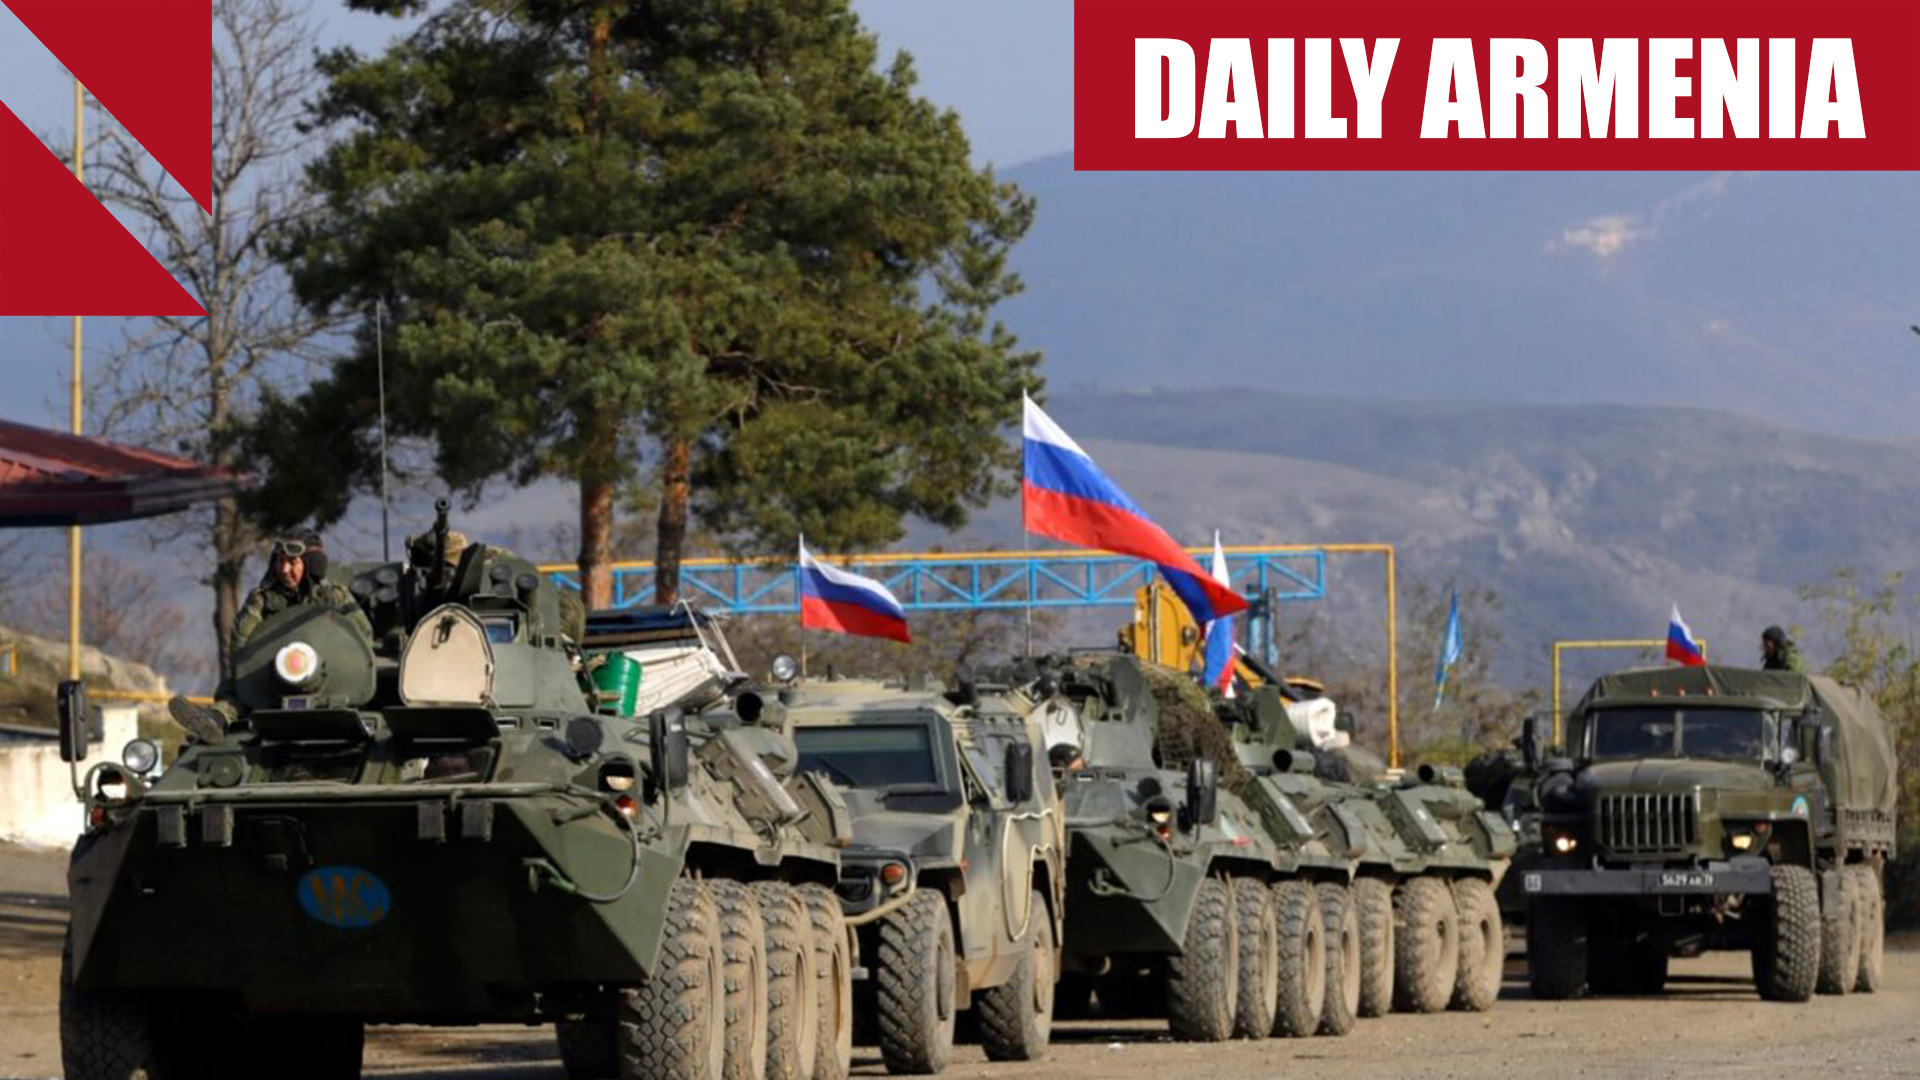 Armenia “mostly” resolves delayed arms shipment issues with Russia